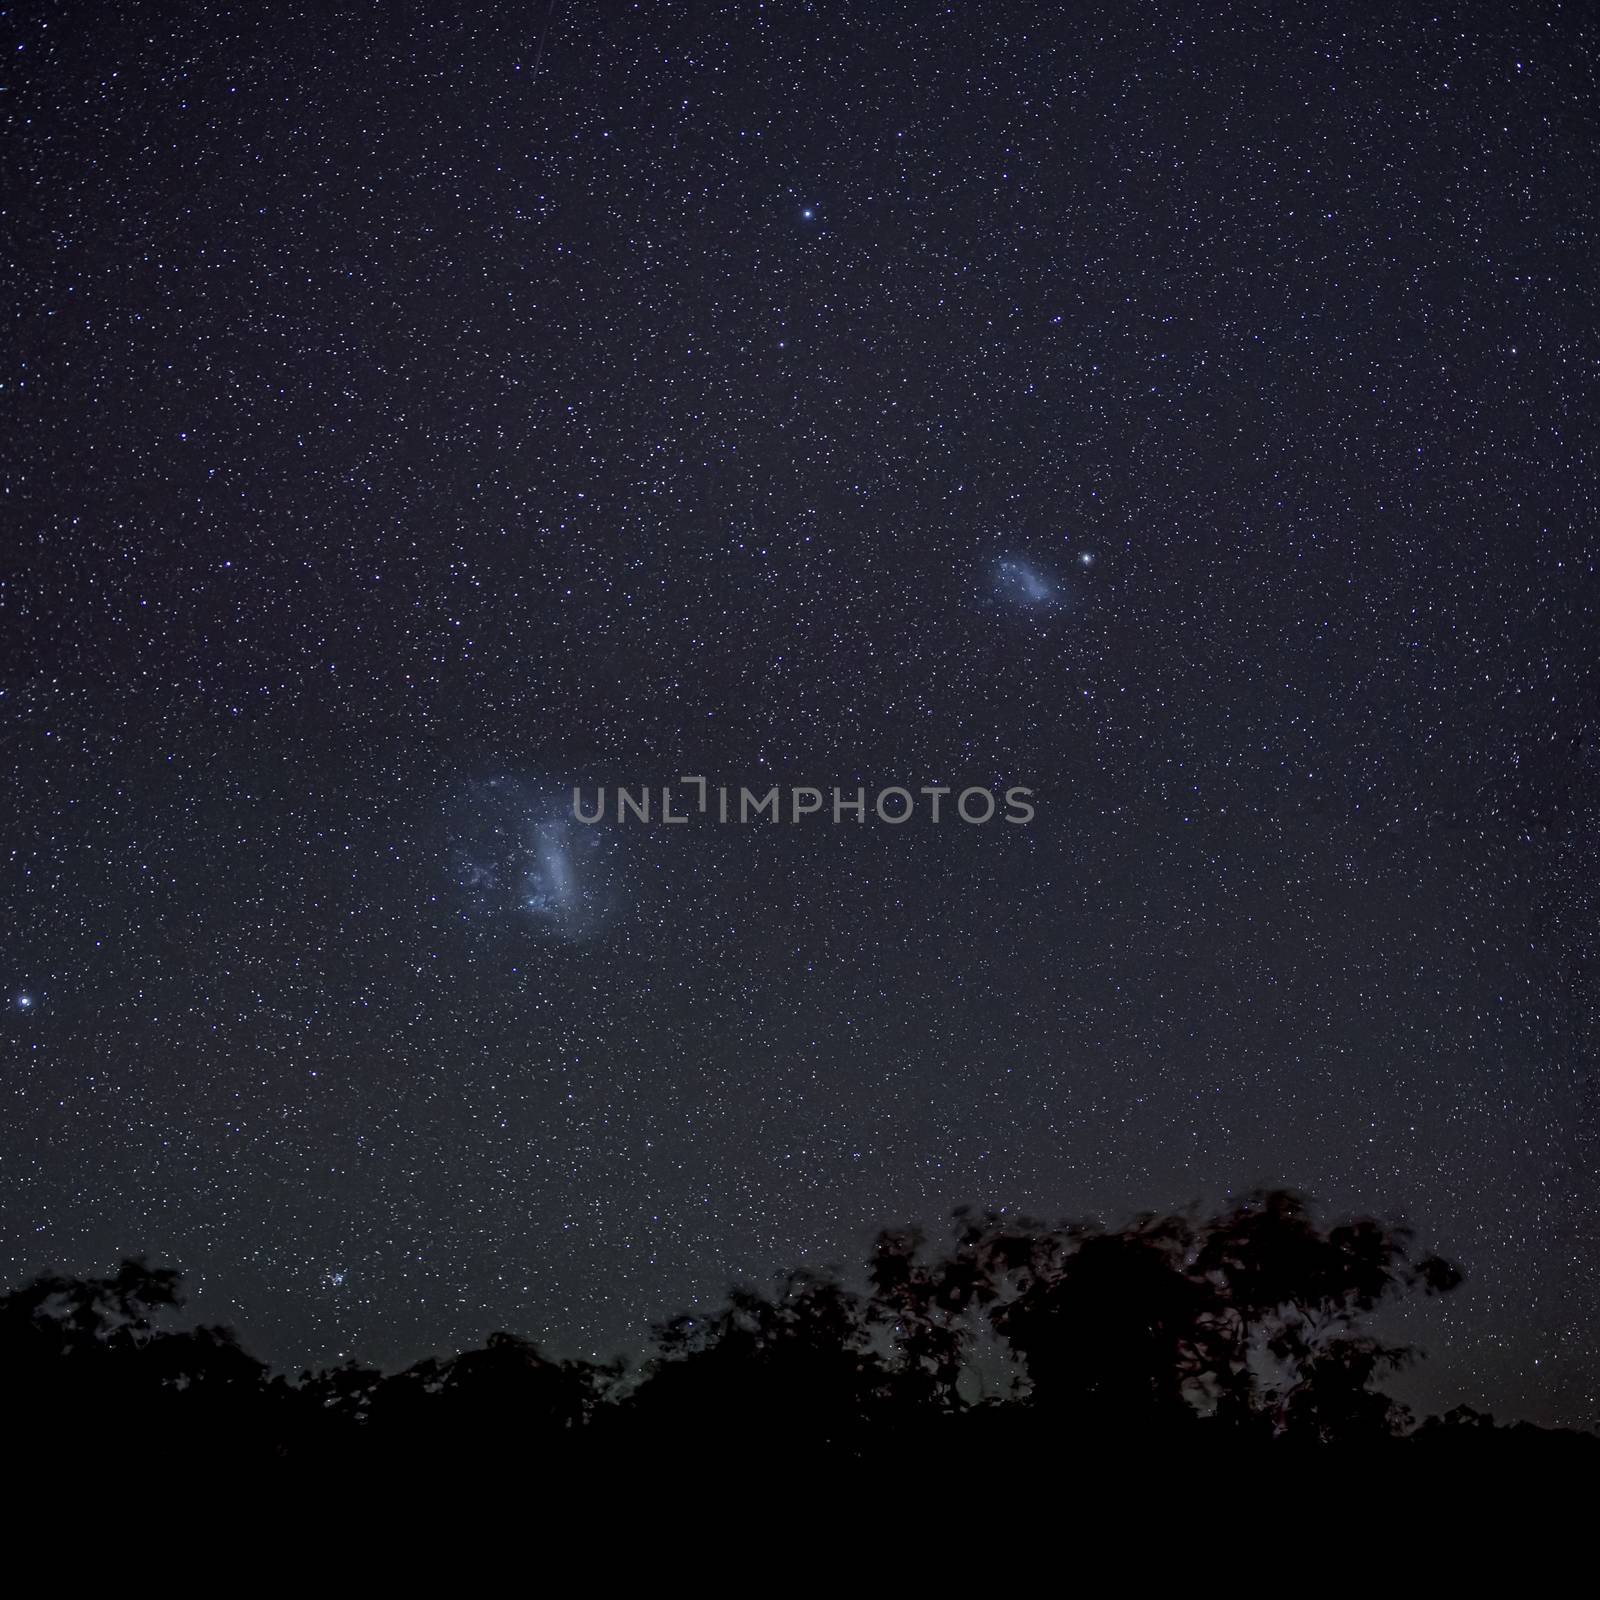 Magellanic Clouds in southern hemisphere night sky above silhouettes of trees by MXW_Stock